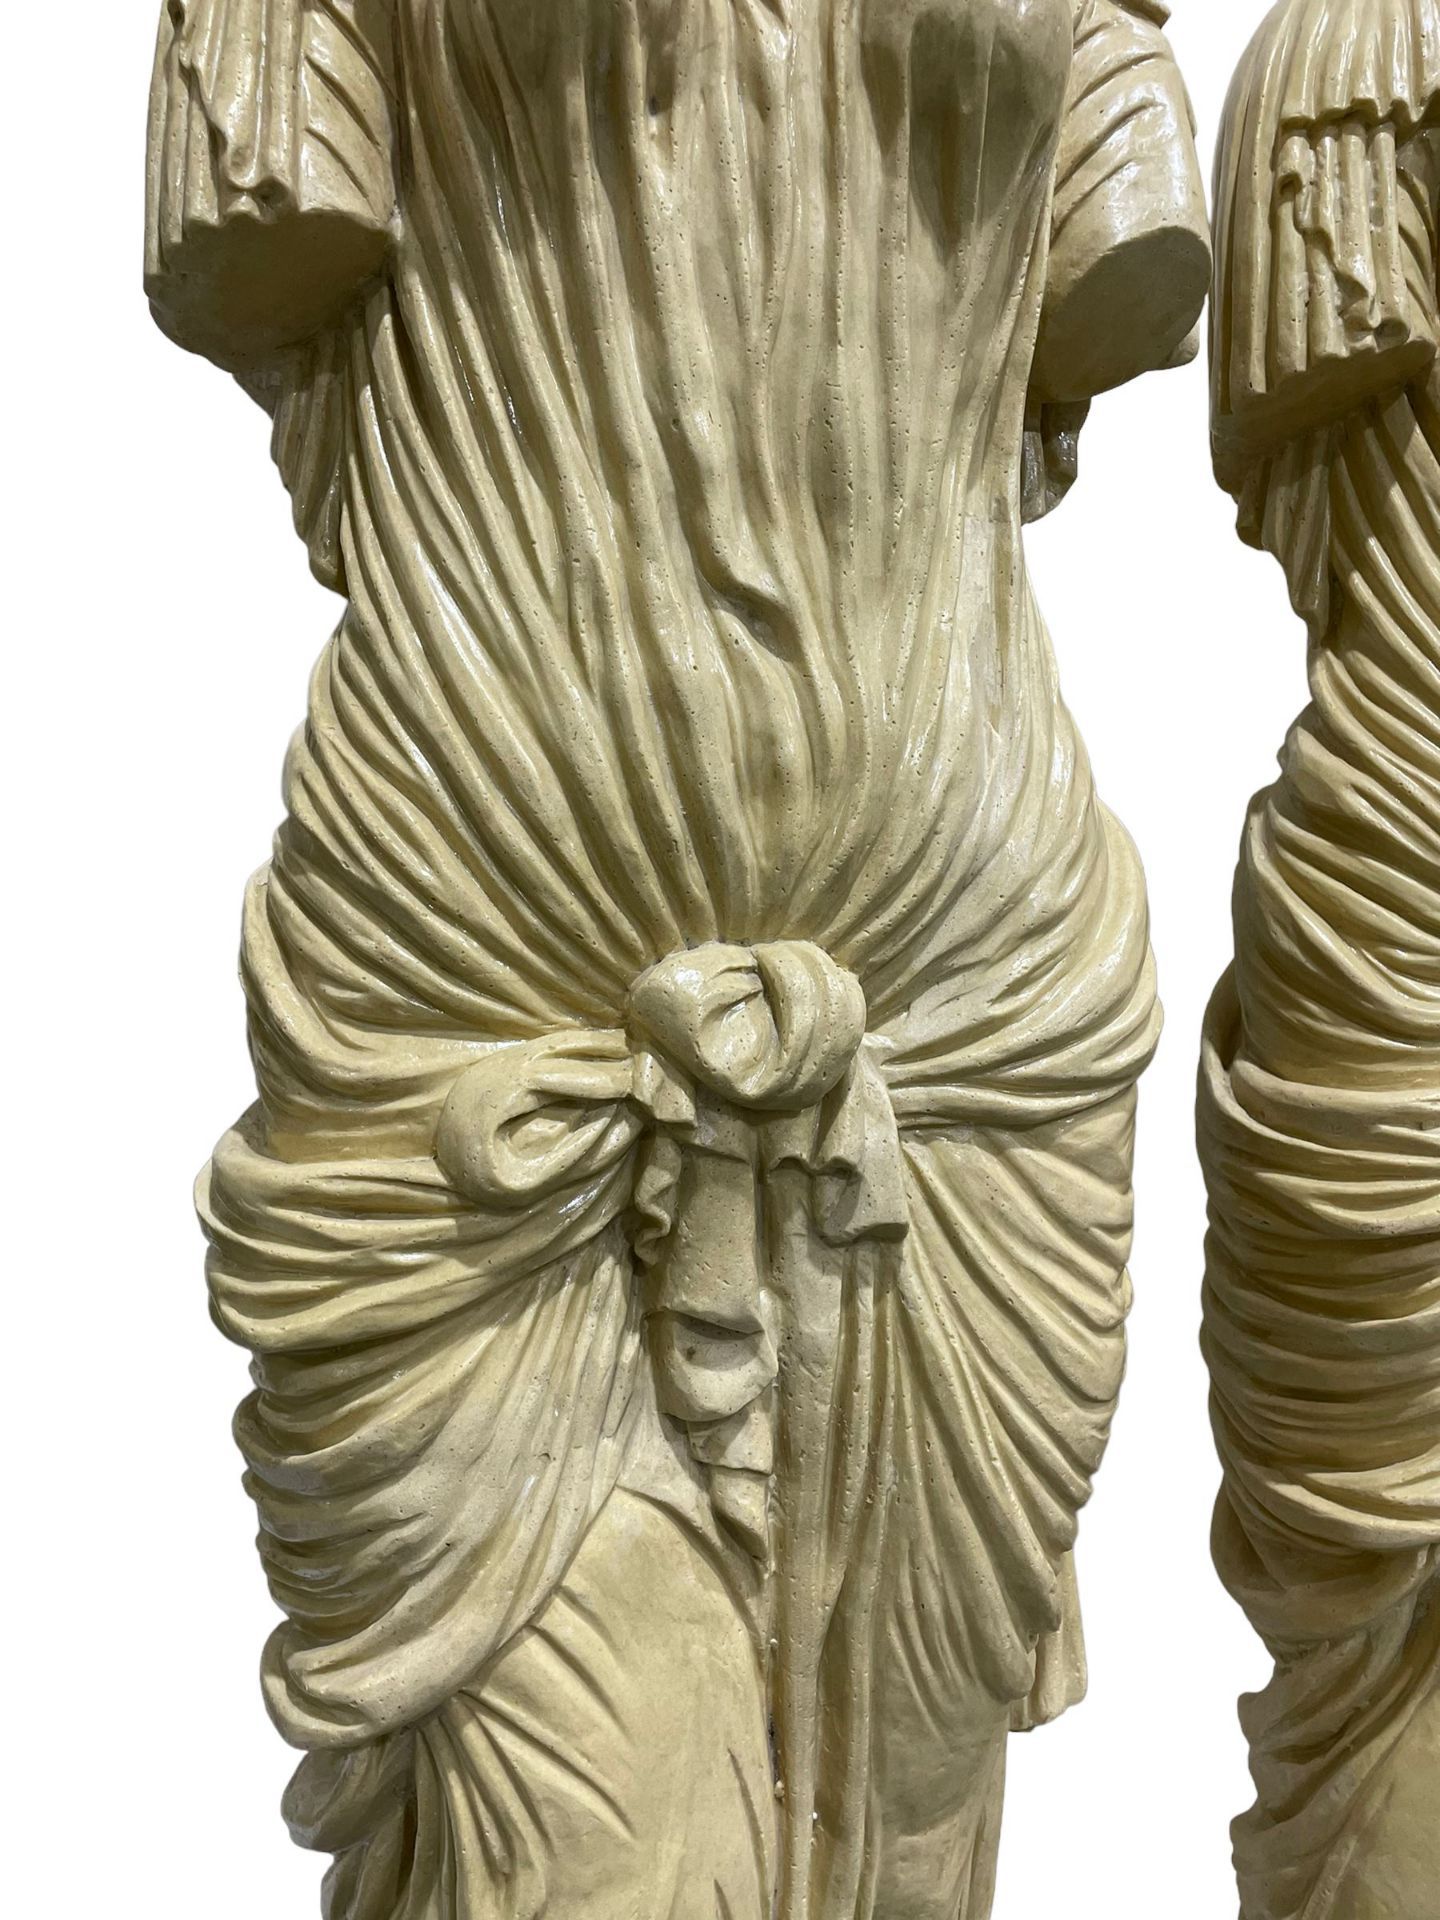 A Pair Of Greek Style Caryatid Columns, Square Top With Gadroon Underbelly, The Semi-Nude Female - Image 2 of 8